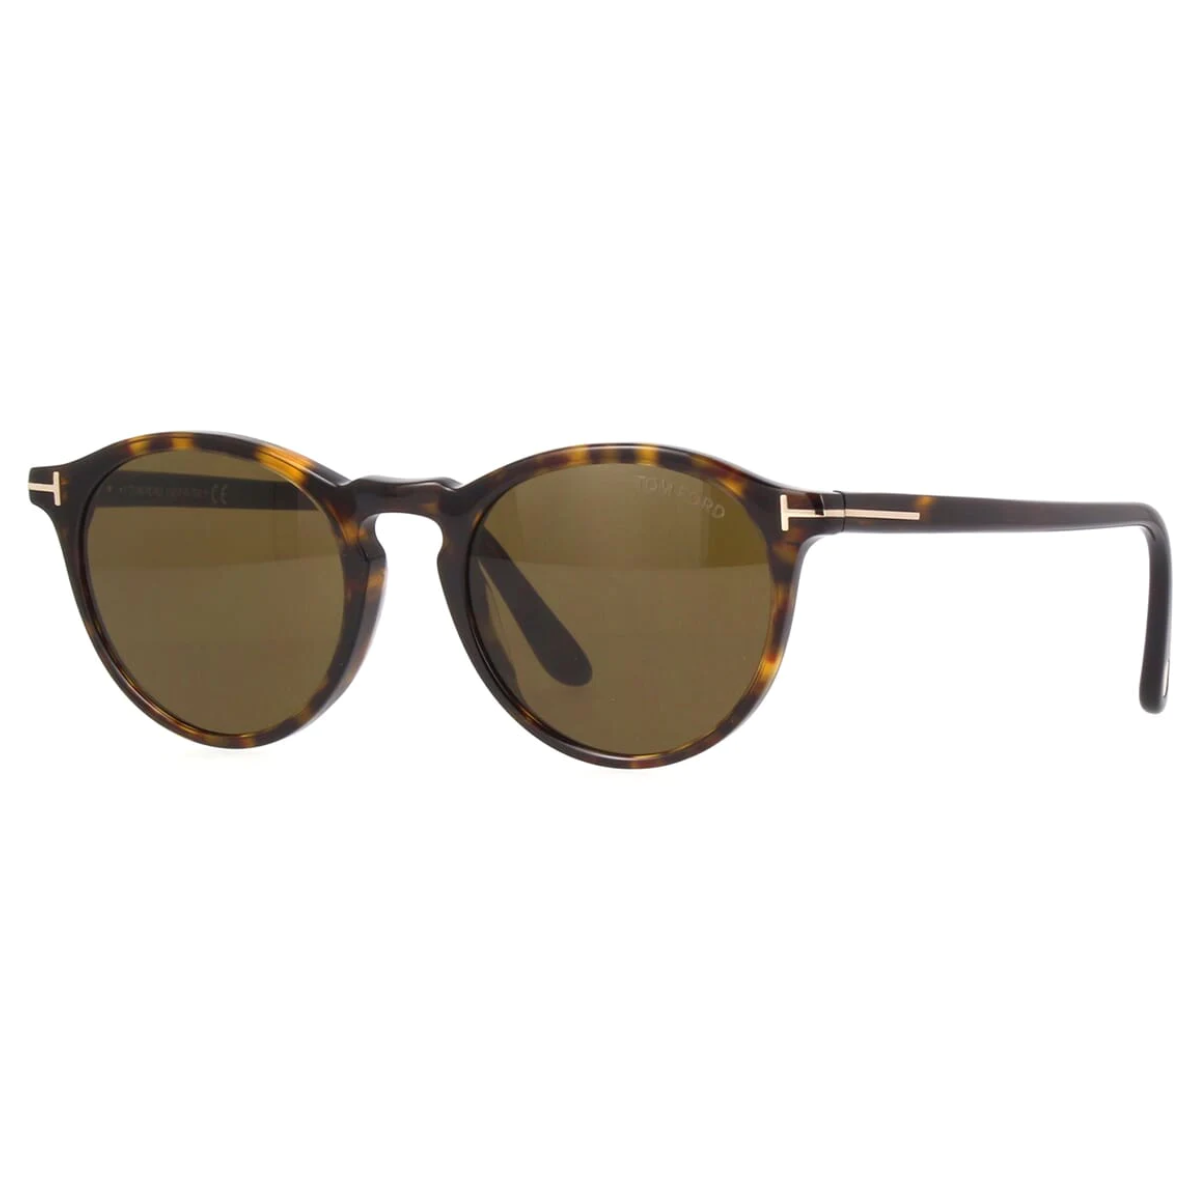 "Tom Ford TF904 52J Circle Sunglasses, a stylish addition to any wardrobe, designed for both men and women. Elevate your look with these top-rated unisex shades from Optorium's selection of Tom Ford glasses."